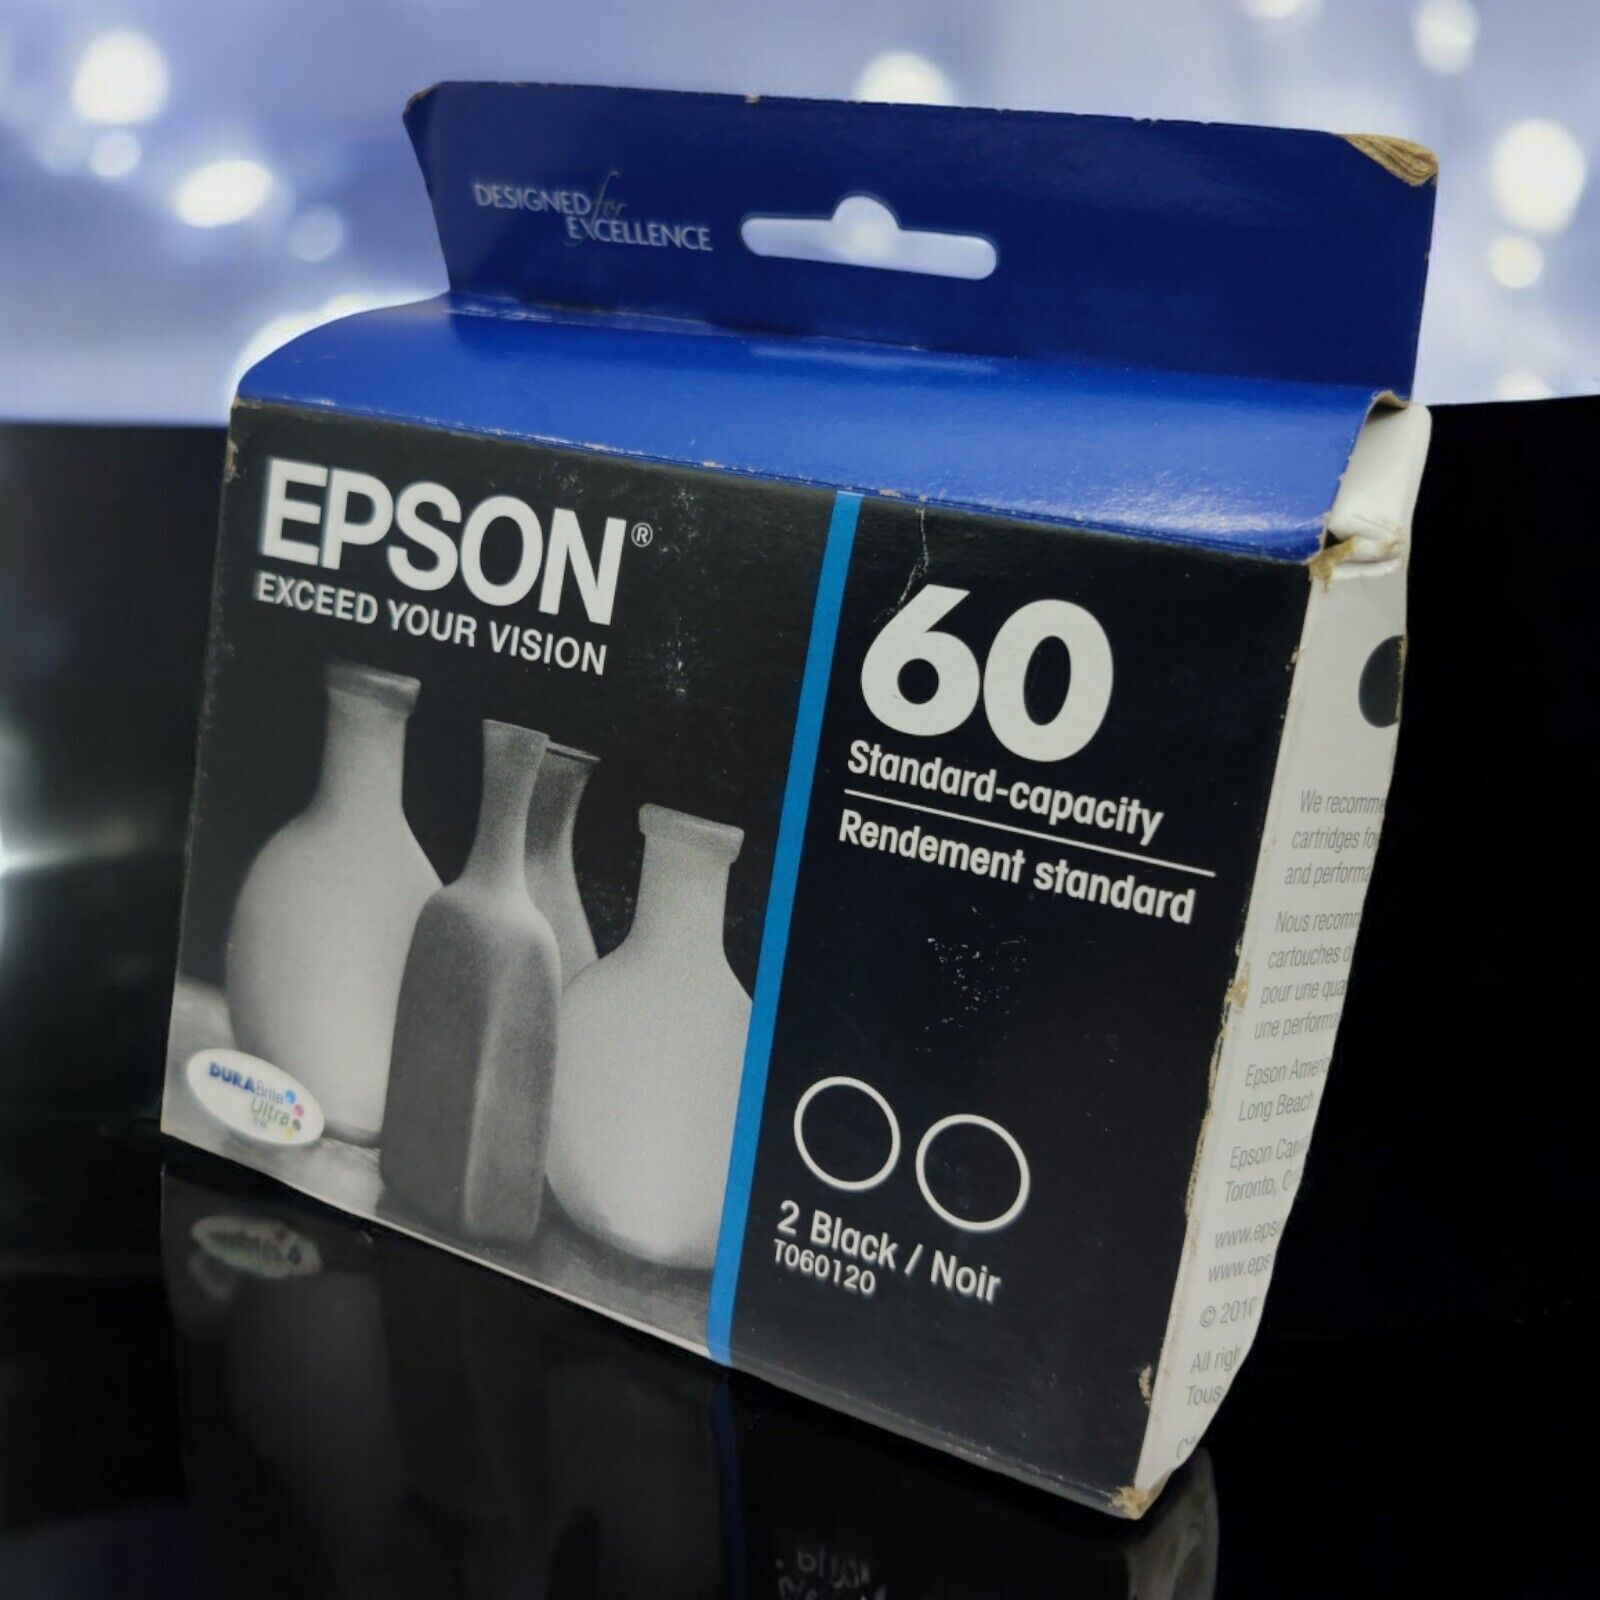 Epson 60 Standard Capacity Black Ink Cartridges Two Pack New EXP 5/2023